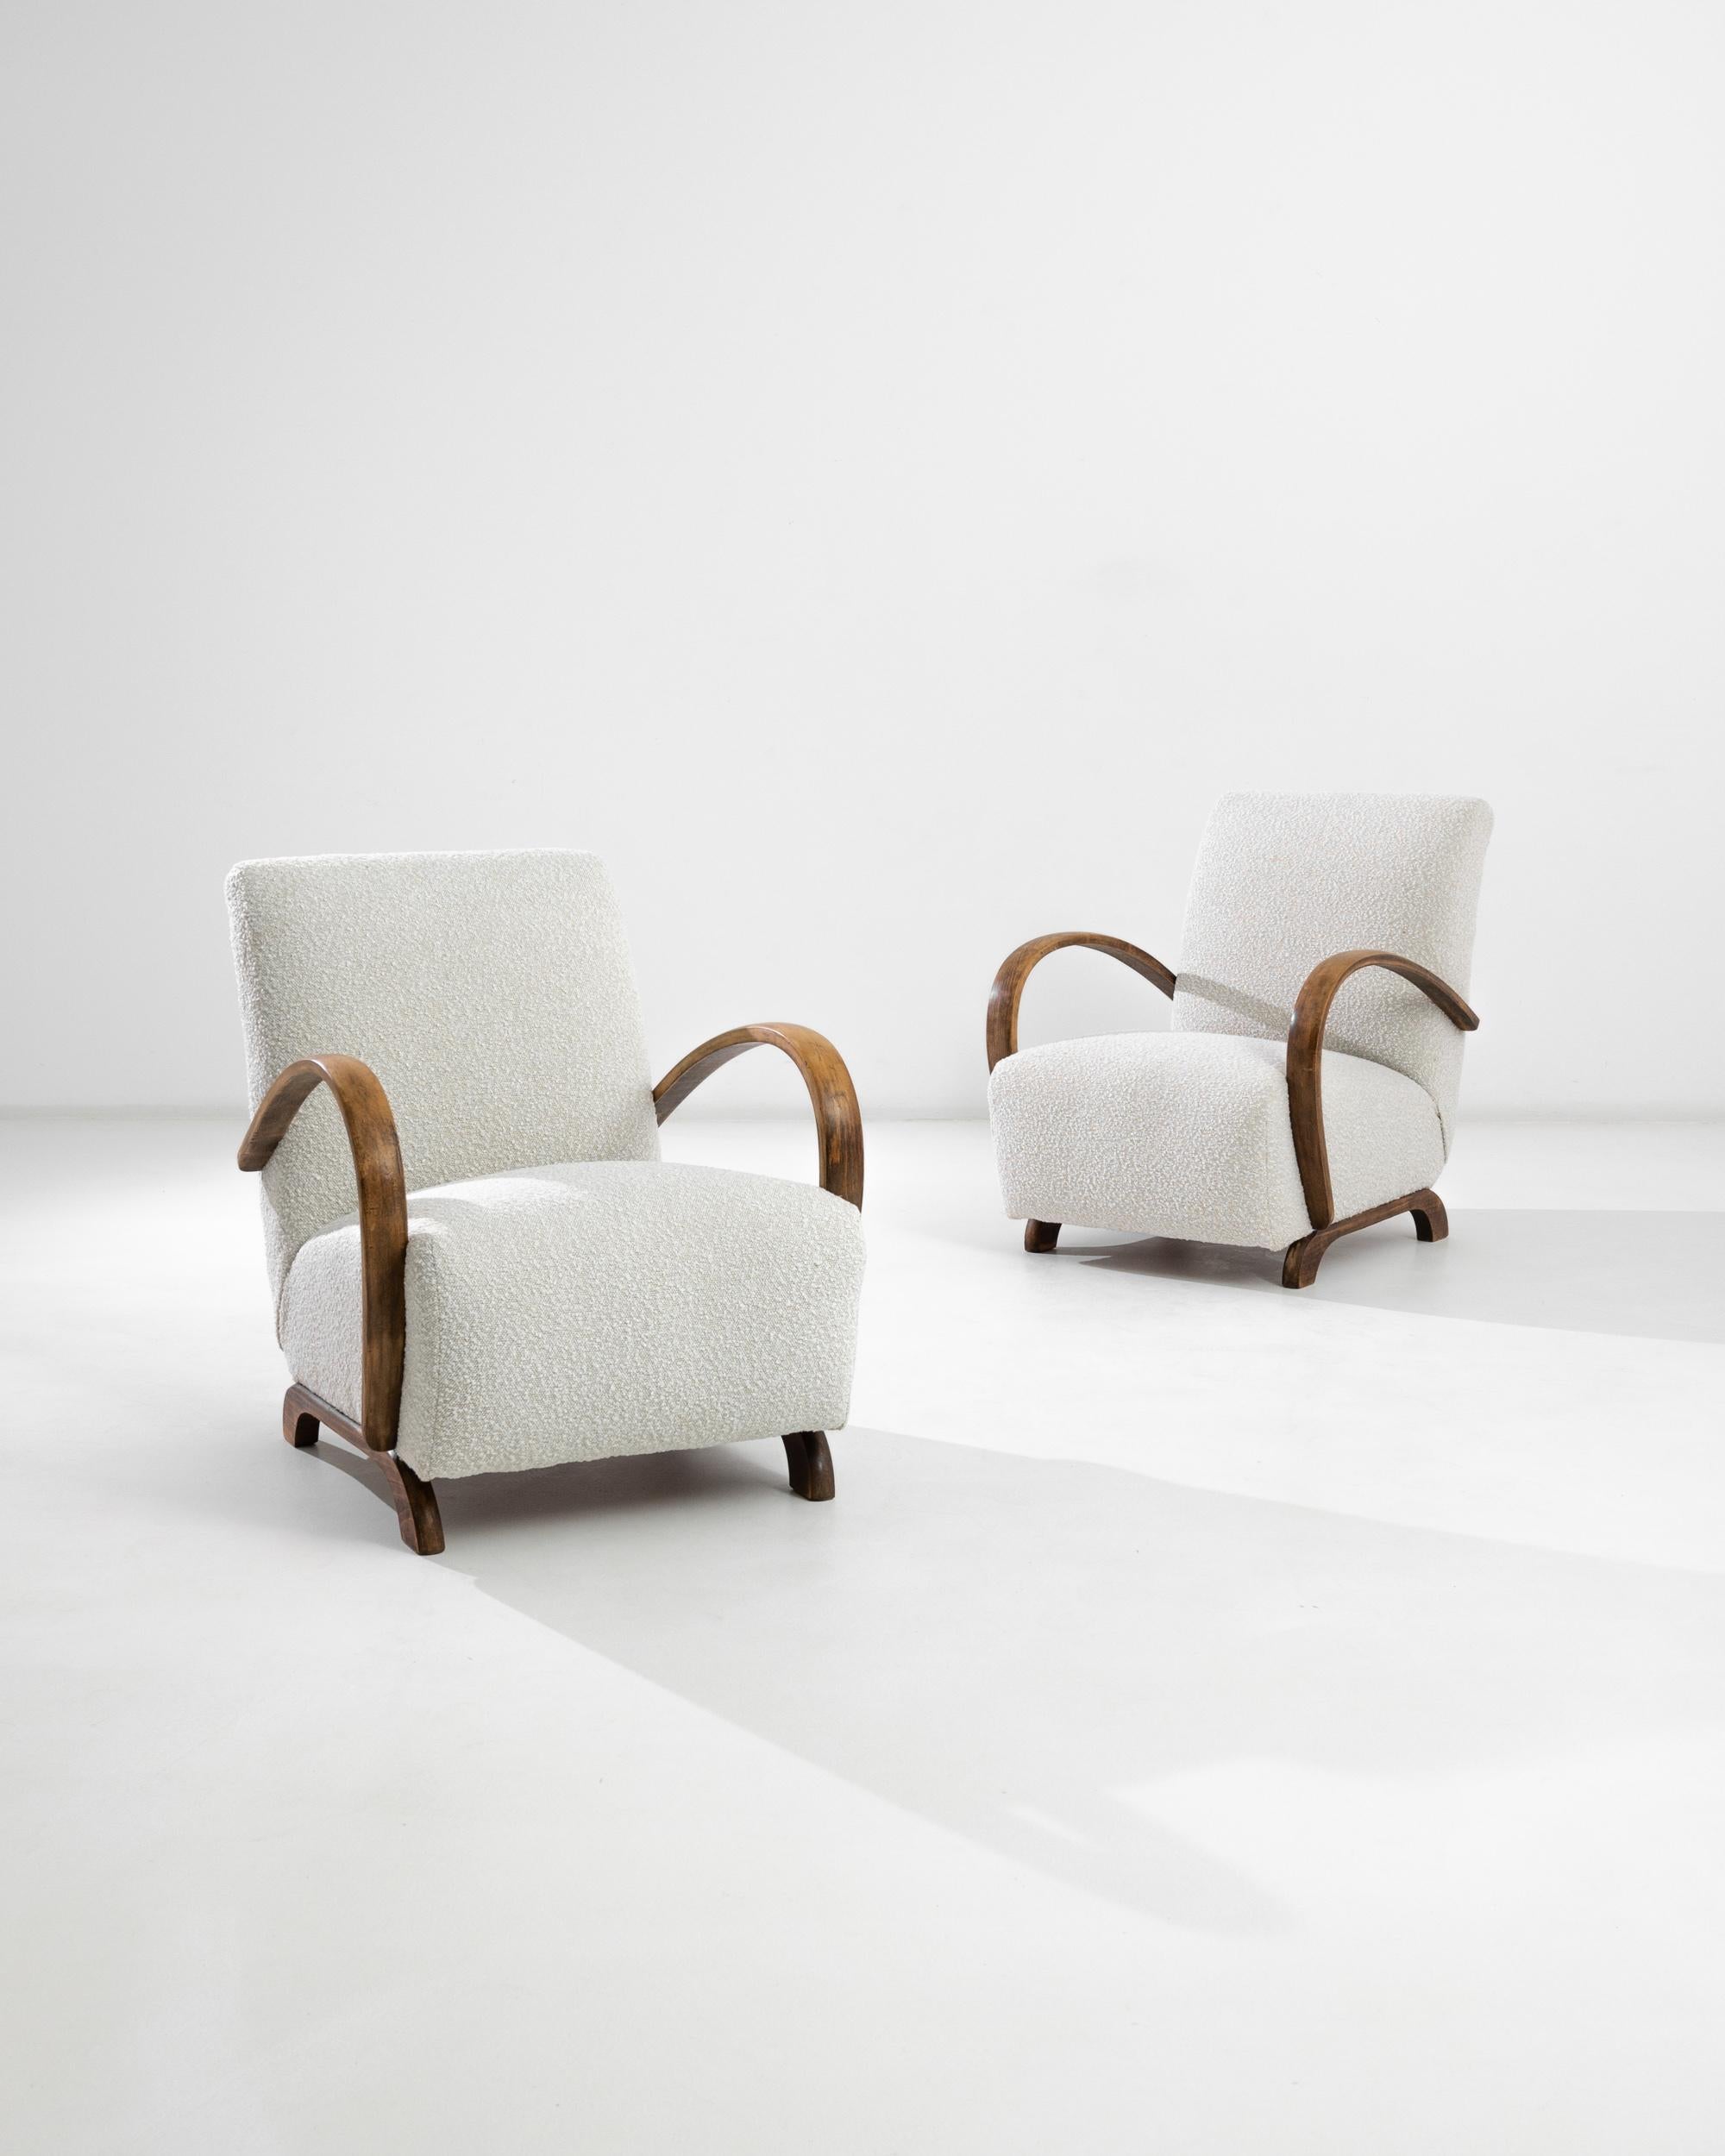 A pair of armchairs by Czech furniture designer Jindrich Halabala. This 1950s design is upholstered in an updated white boucé fabric, the textural neutral was chosen to compliment the embracing warmth of the brown hardwood frame. Influenced by